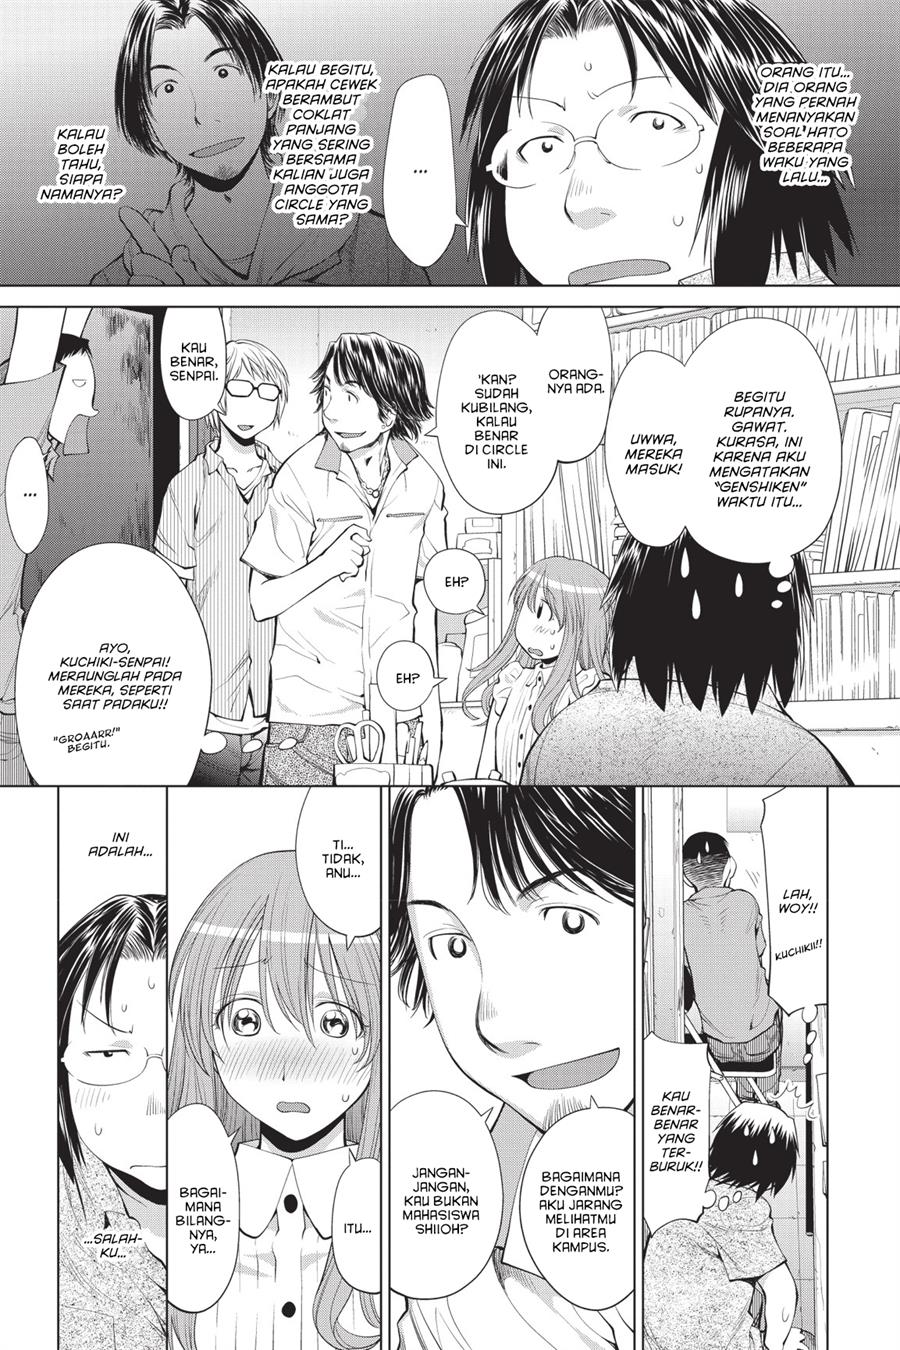 Genshiken – The Society for the Study of Modern Visual Culture Chapter 68 Image 6